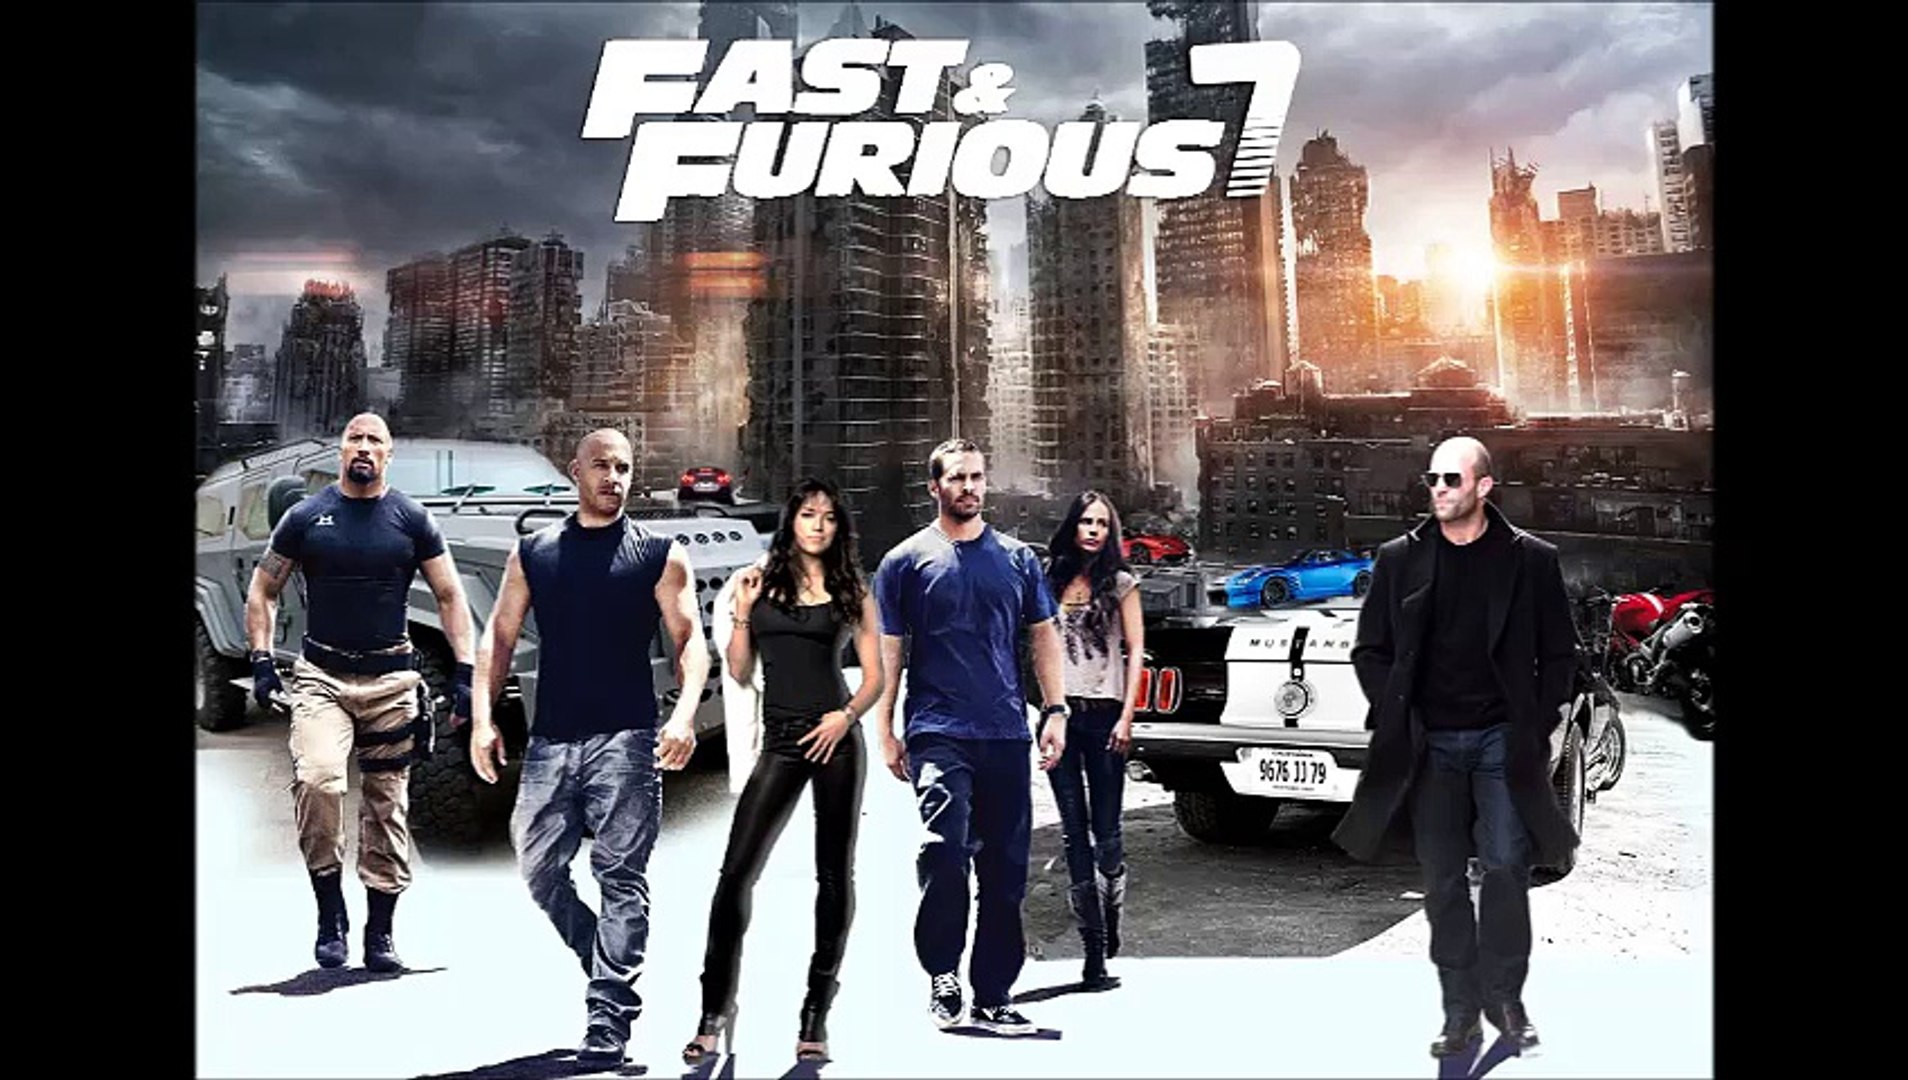 Fast &Furious 7 2015 (Hindi Dubbed) 2015 - video Dailymotion